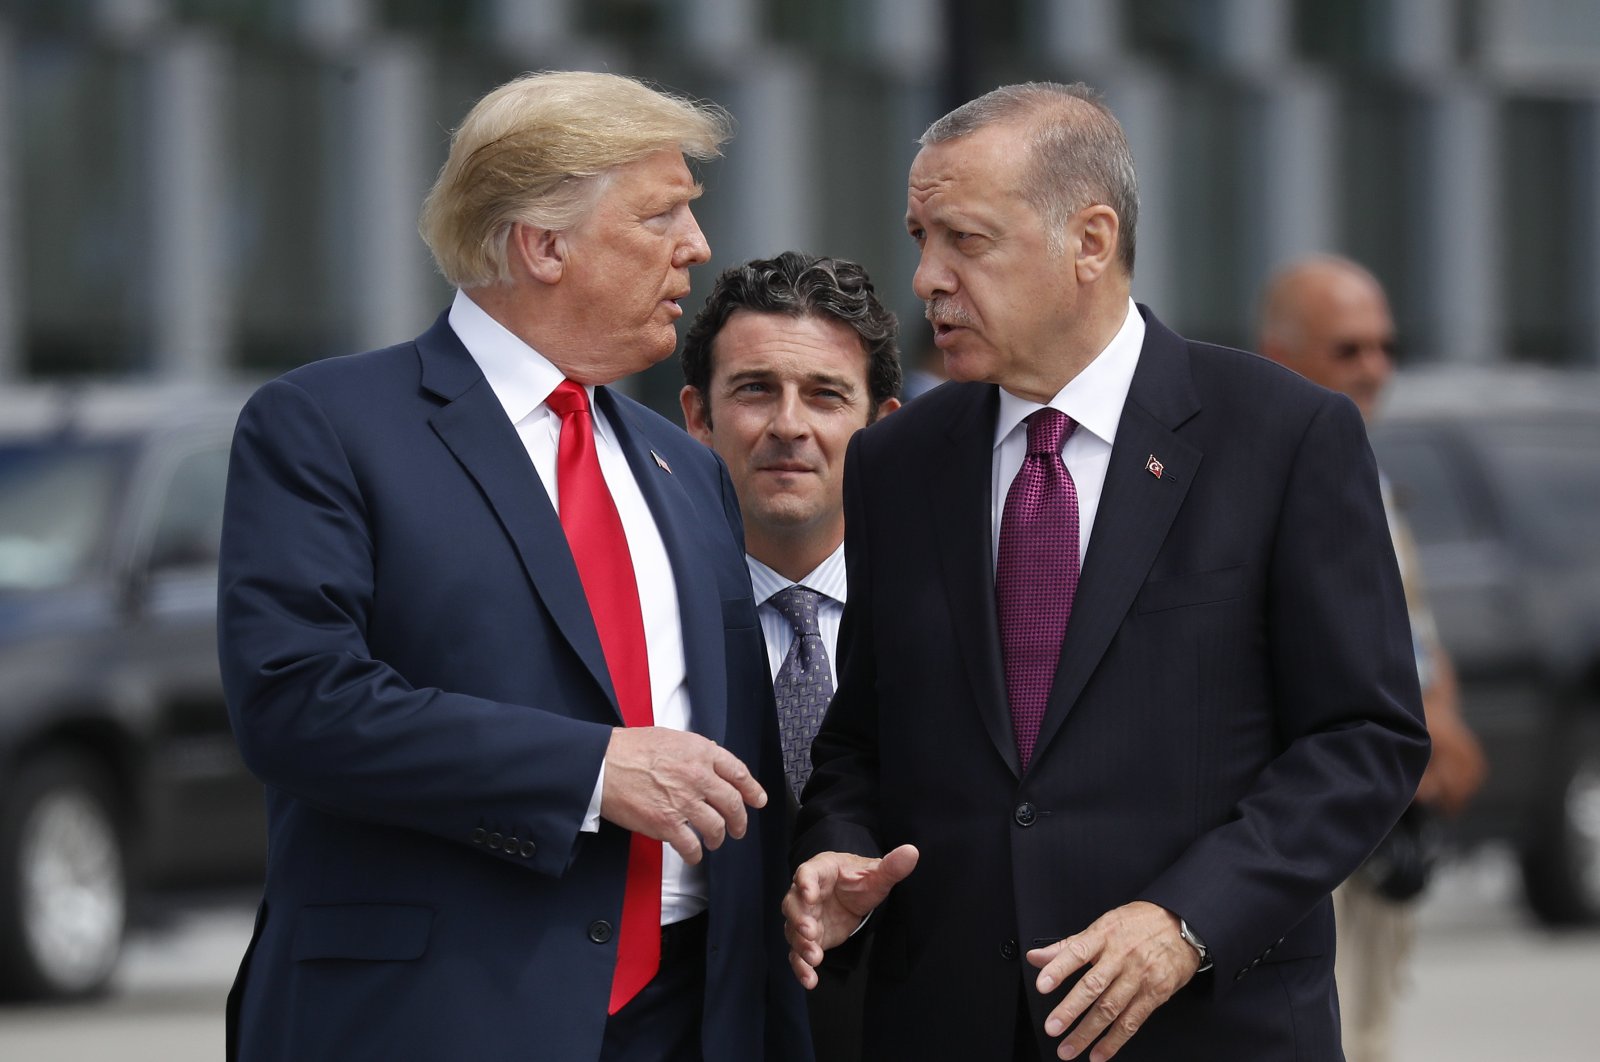 U.S. President Donald Trump (L) talks with President Recep Tayyip Erdoğan as they arrive together for a family photo at a summit of heads of state and government at NATO headquarters in Brussels, July 11, 2018. (AP Photo)